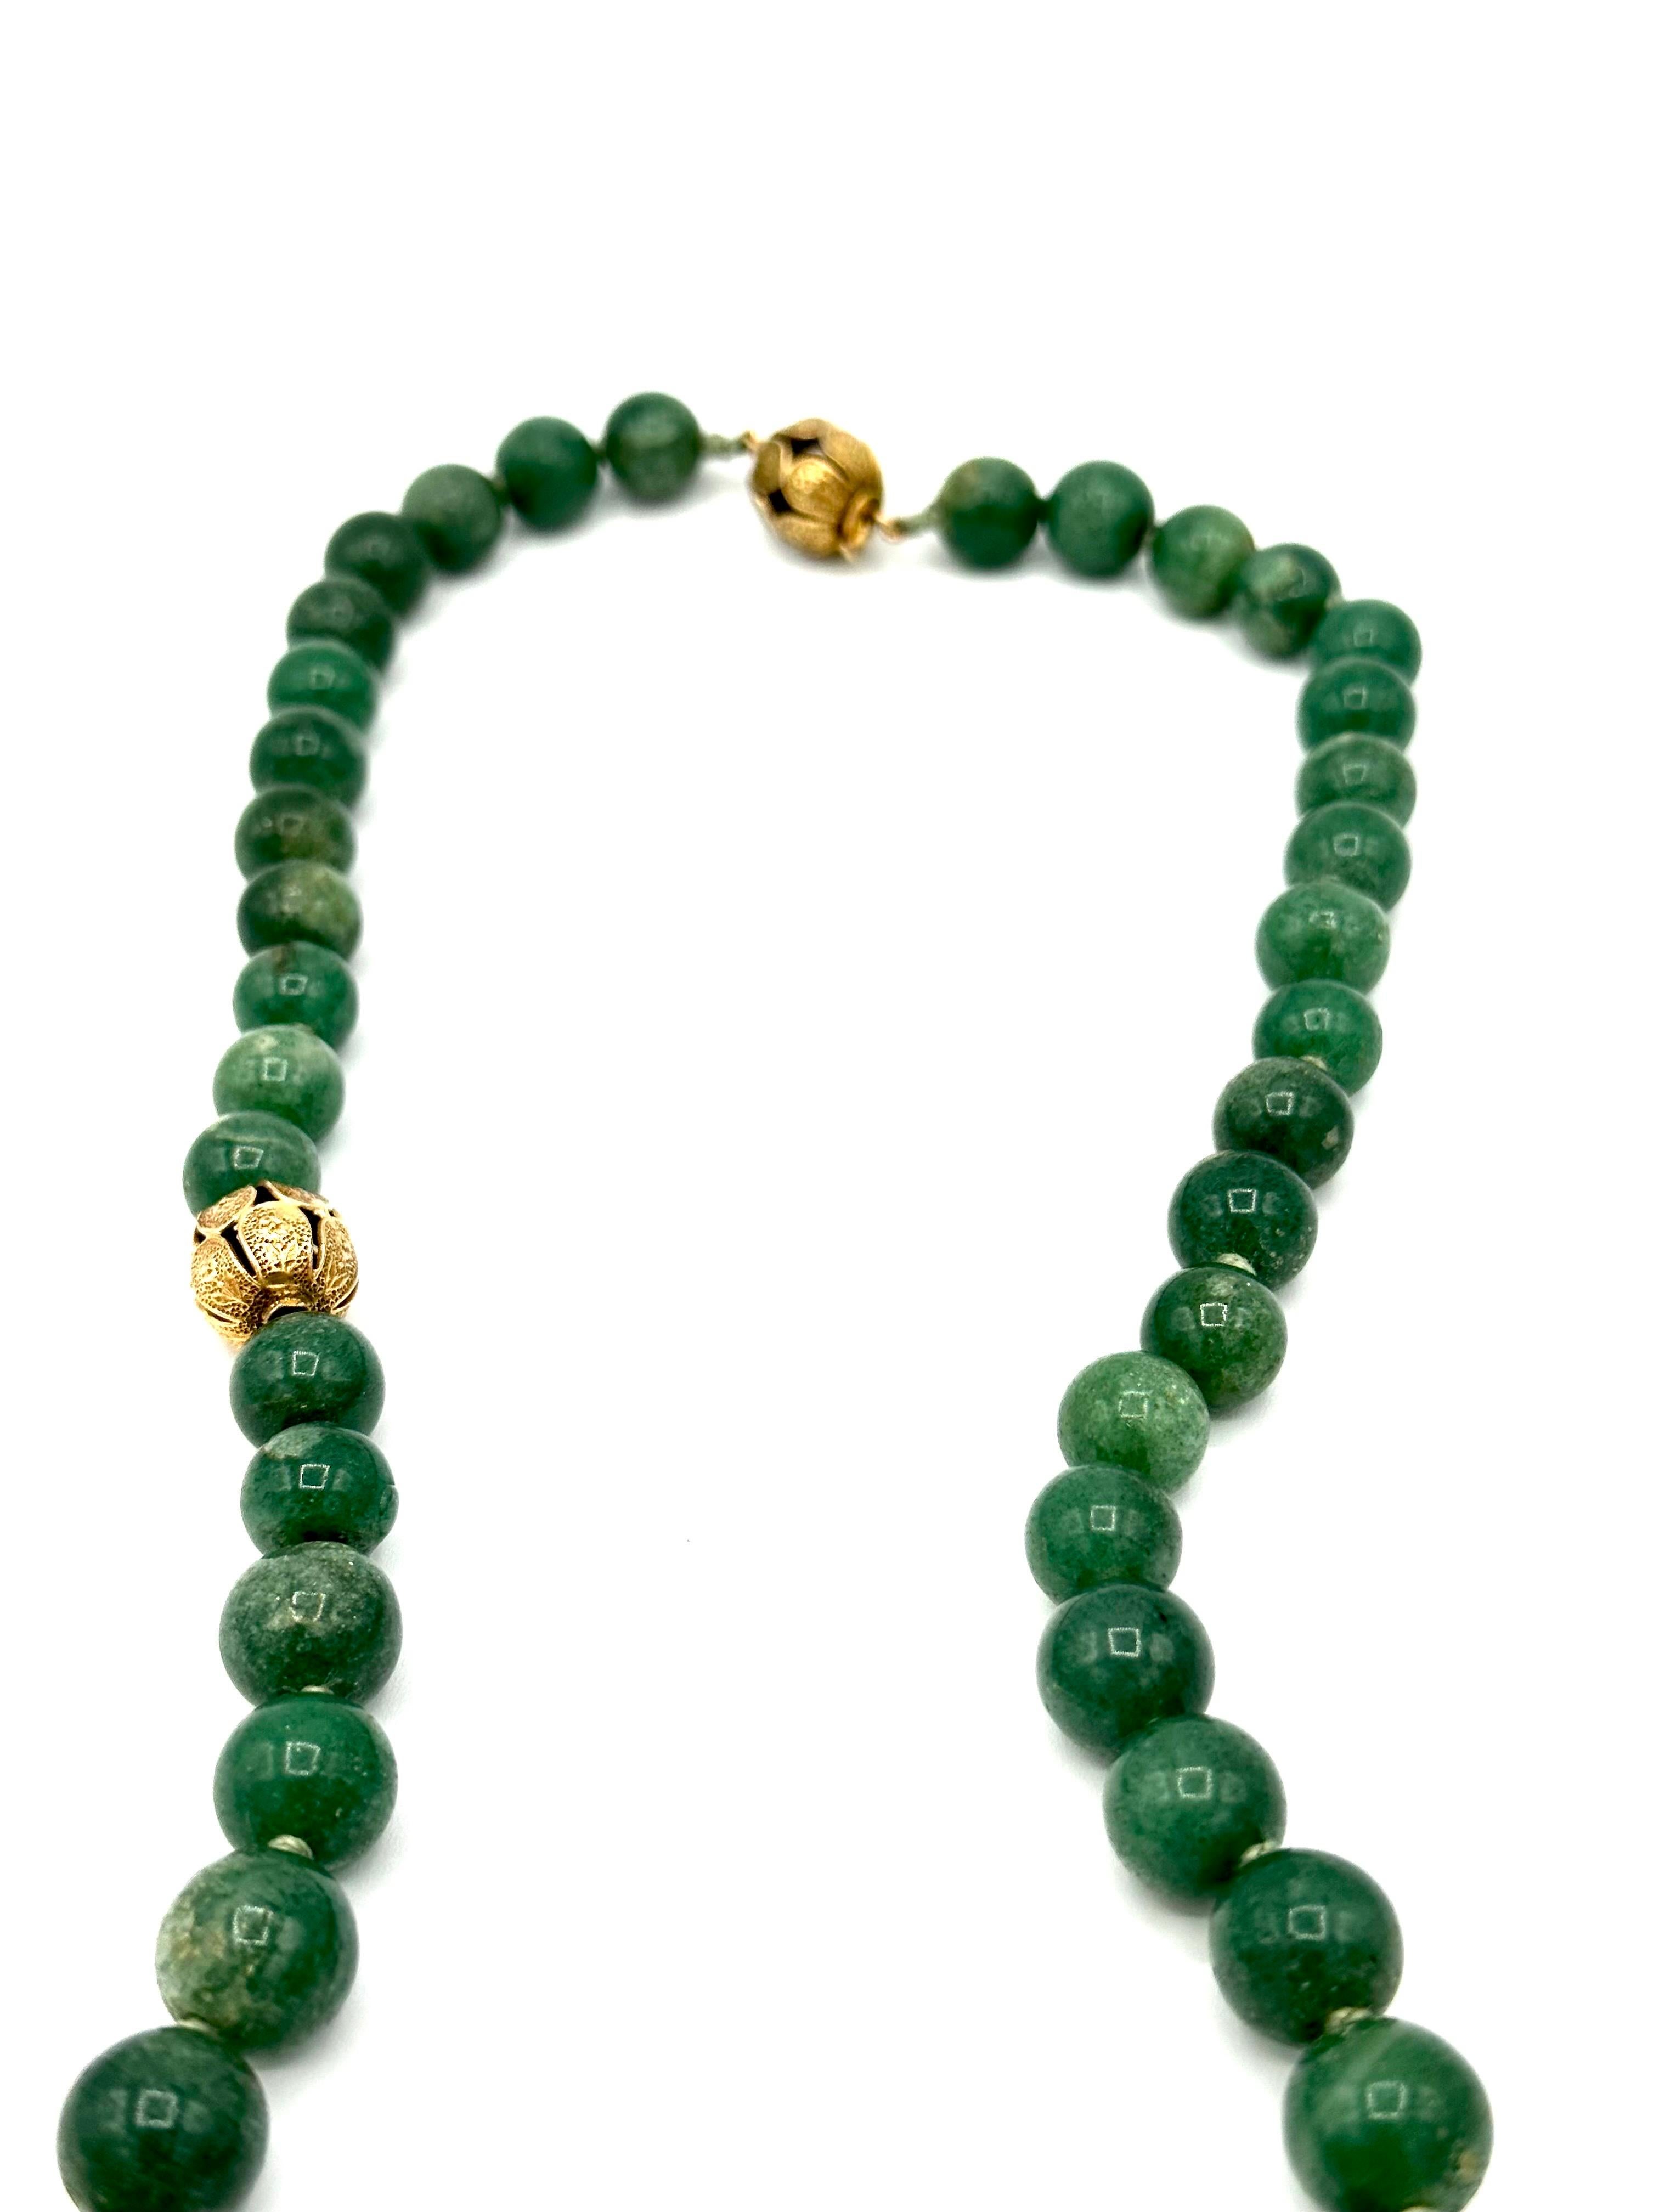 A rare to find beaded Aventurine long necklace designed by Seaman Schepps.  The Aventurine beads are separated by hand crafted 14K yellow gold rondelles depicting floral patterns.  The necklace features one very large carved Aventurine bead, to be